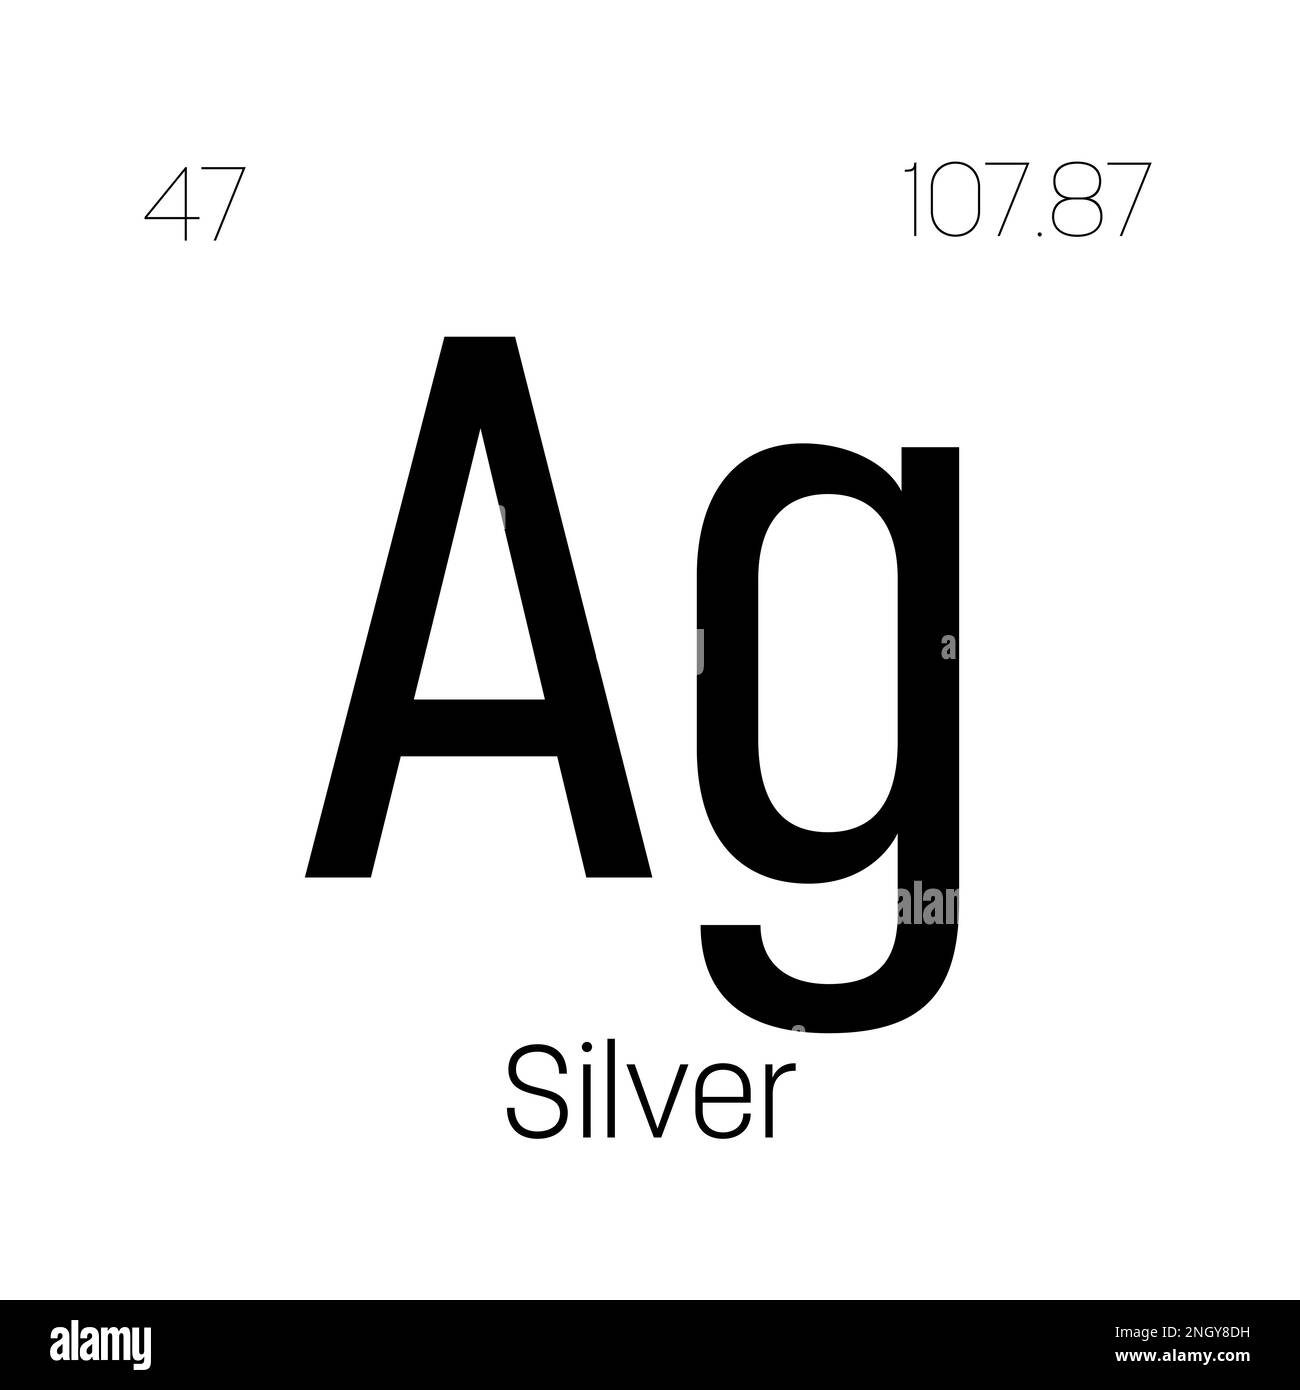 Silver, Ag, periodic table element with name, symbol, atomic number and weight. Transition metal with various industrial uses, such as in jewelry, coins, and as a component in certain types of medical devices. Stock Vector